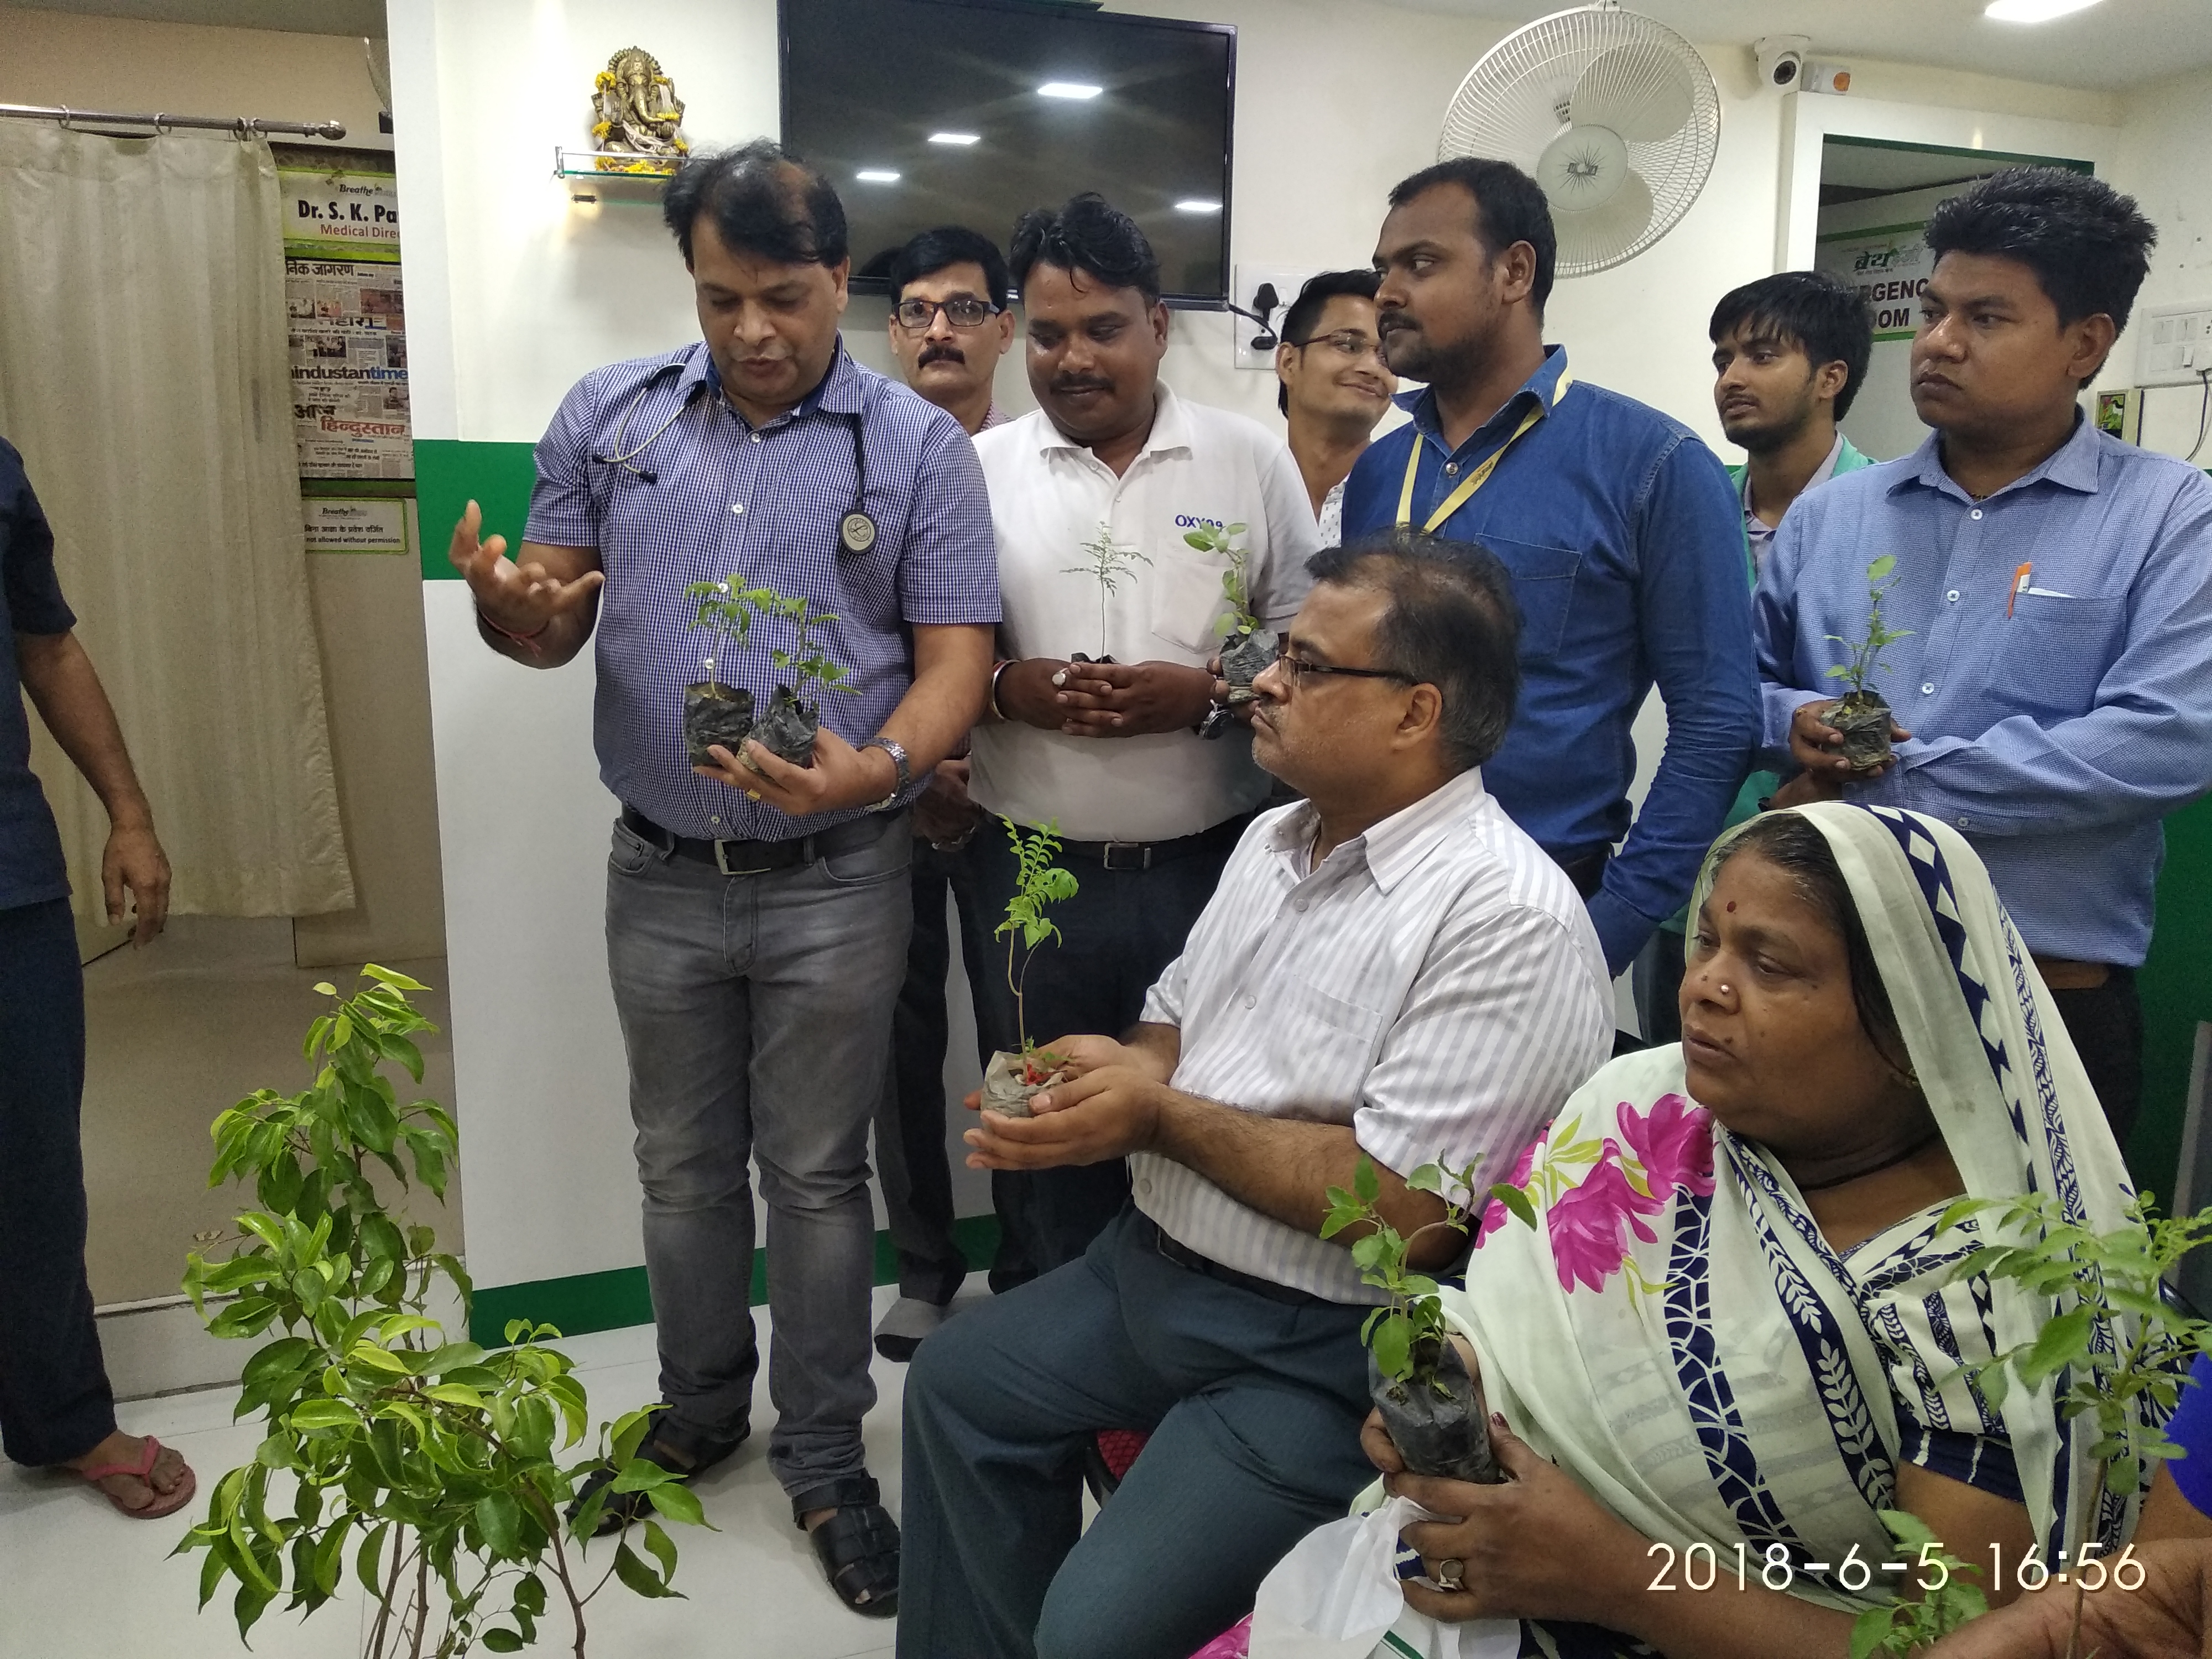 Celebration on the eve of world Environment day with Dr S K Pathak (Director Breathe Easy hospital Varanasi)